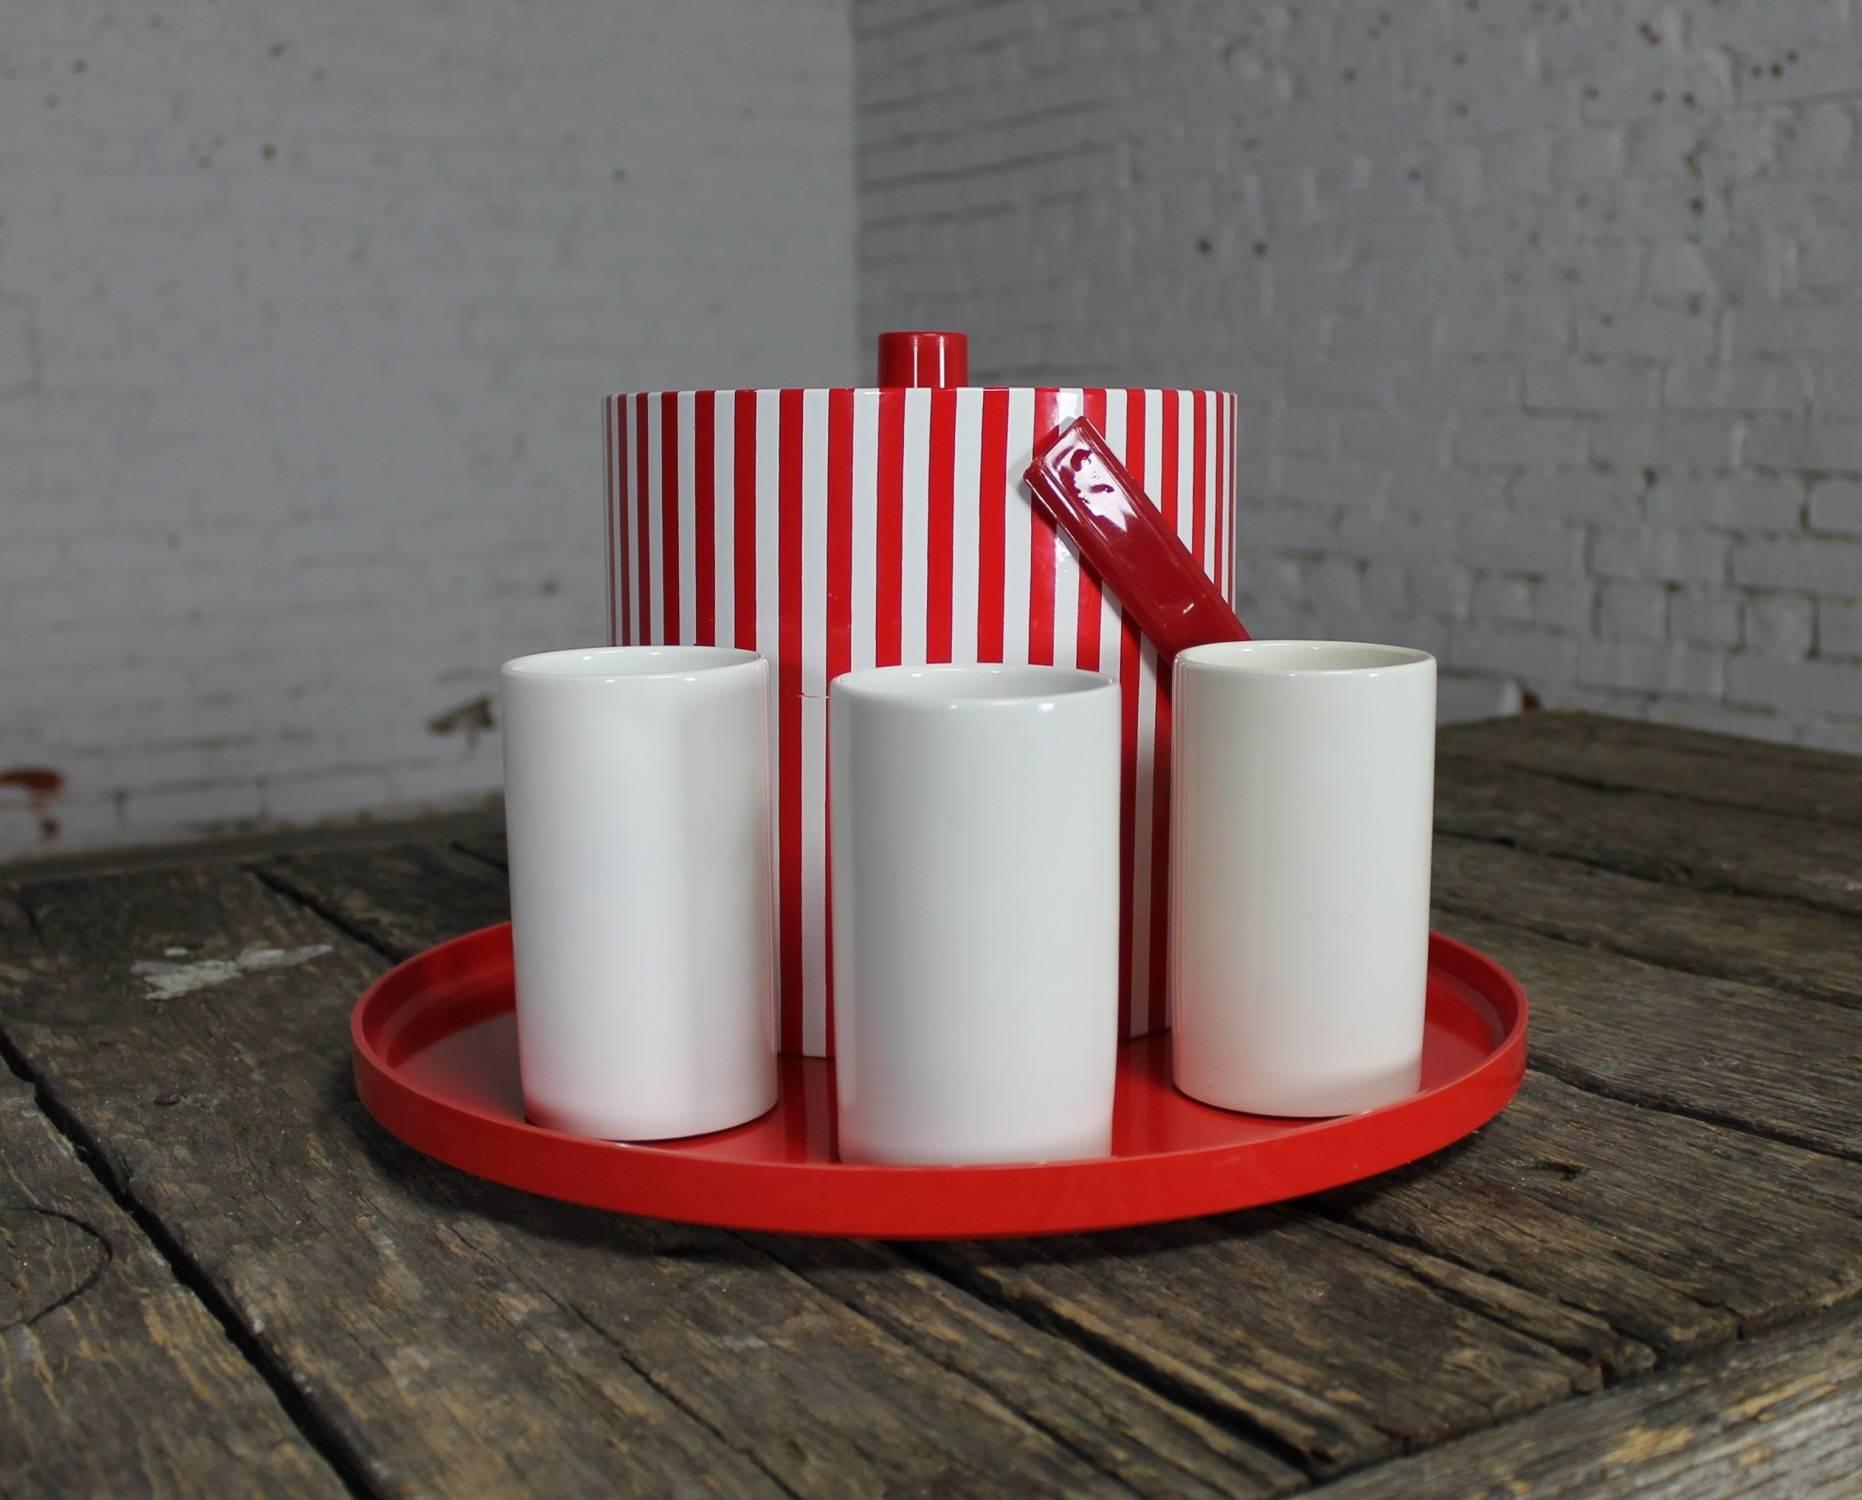 Fun vintage Mid-Century Modern style beverage set combo consisting of a Prisma red and white striped ice bucket, three white Jonathan Adler tumblers and a red Massimo Vignelli for Heller tray. All in wonderful condition.

What a fun set and just